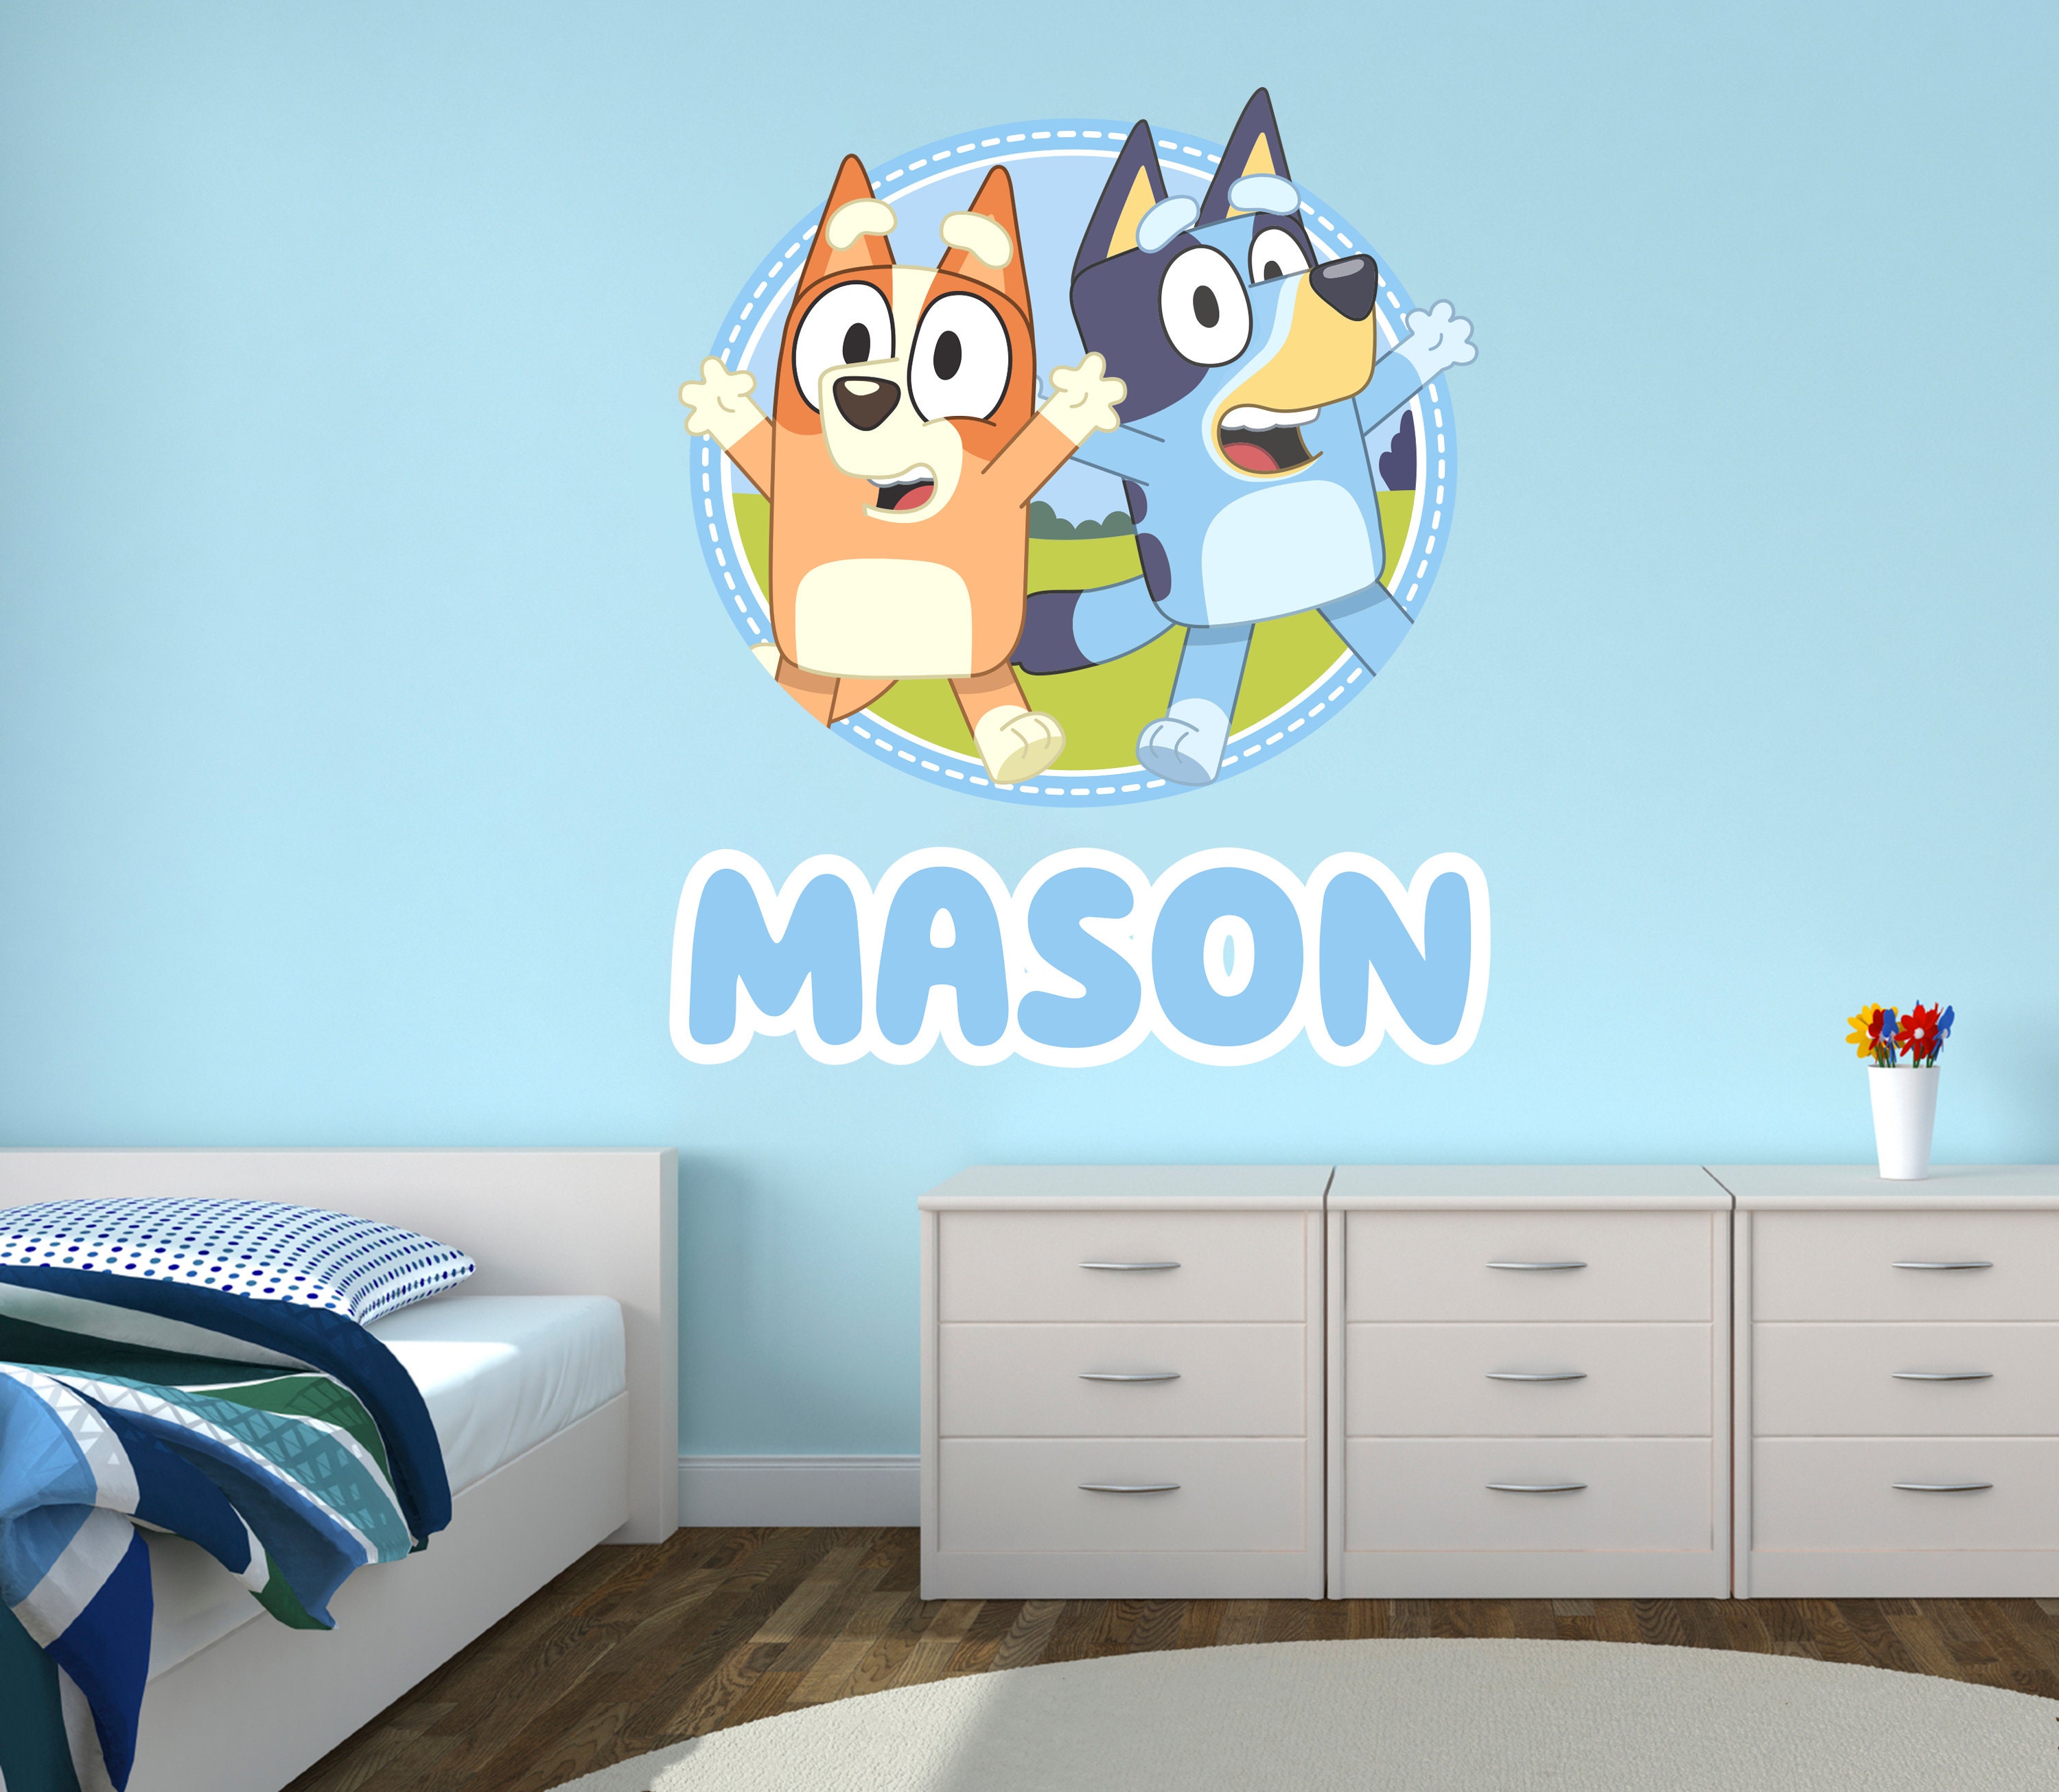 Wall decals of cartoon characters